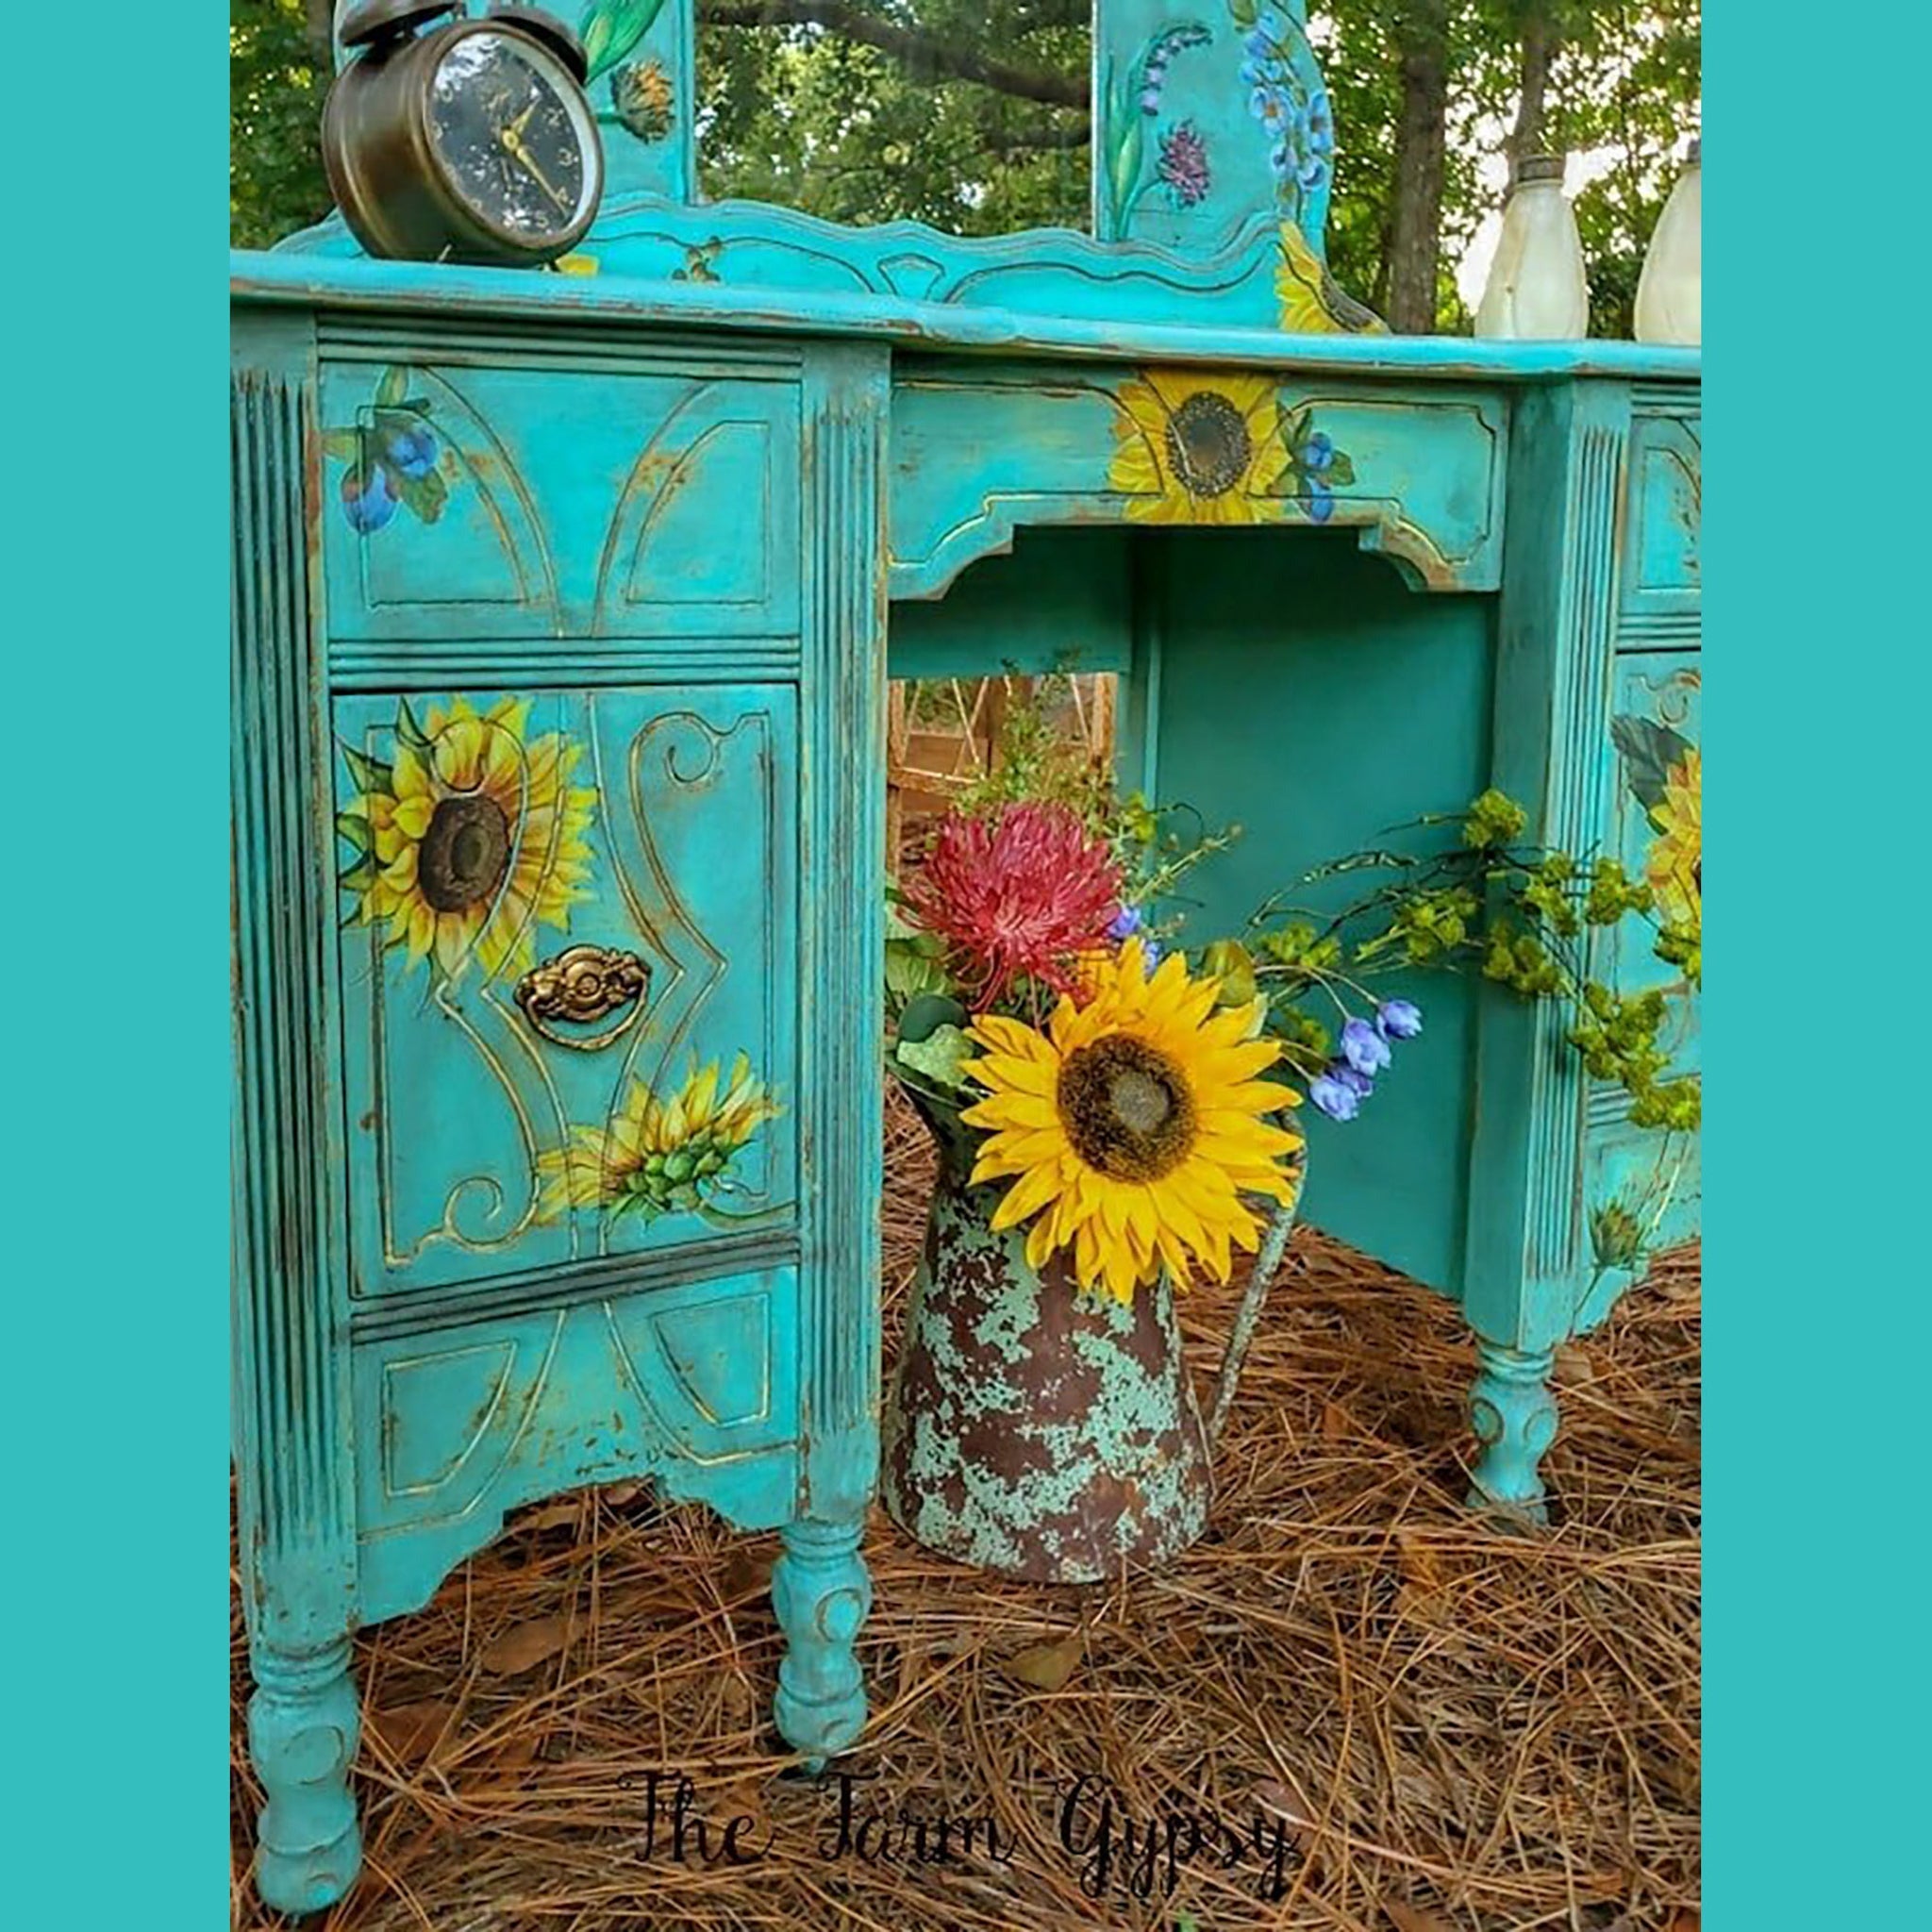 A vintage vanity refurbished by The Farm Gypsy is painted light teal and features the Sunflowers Transfer on it.